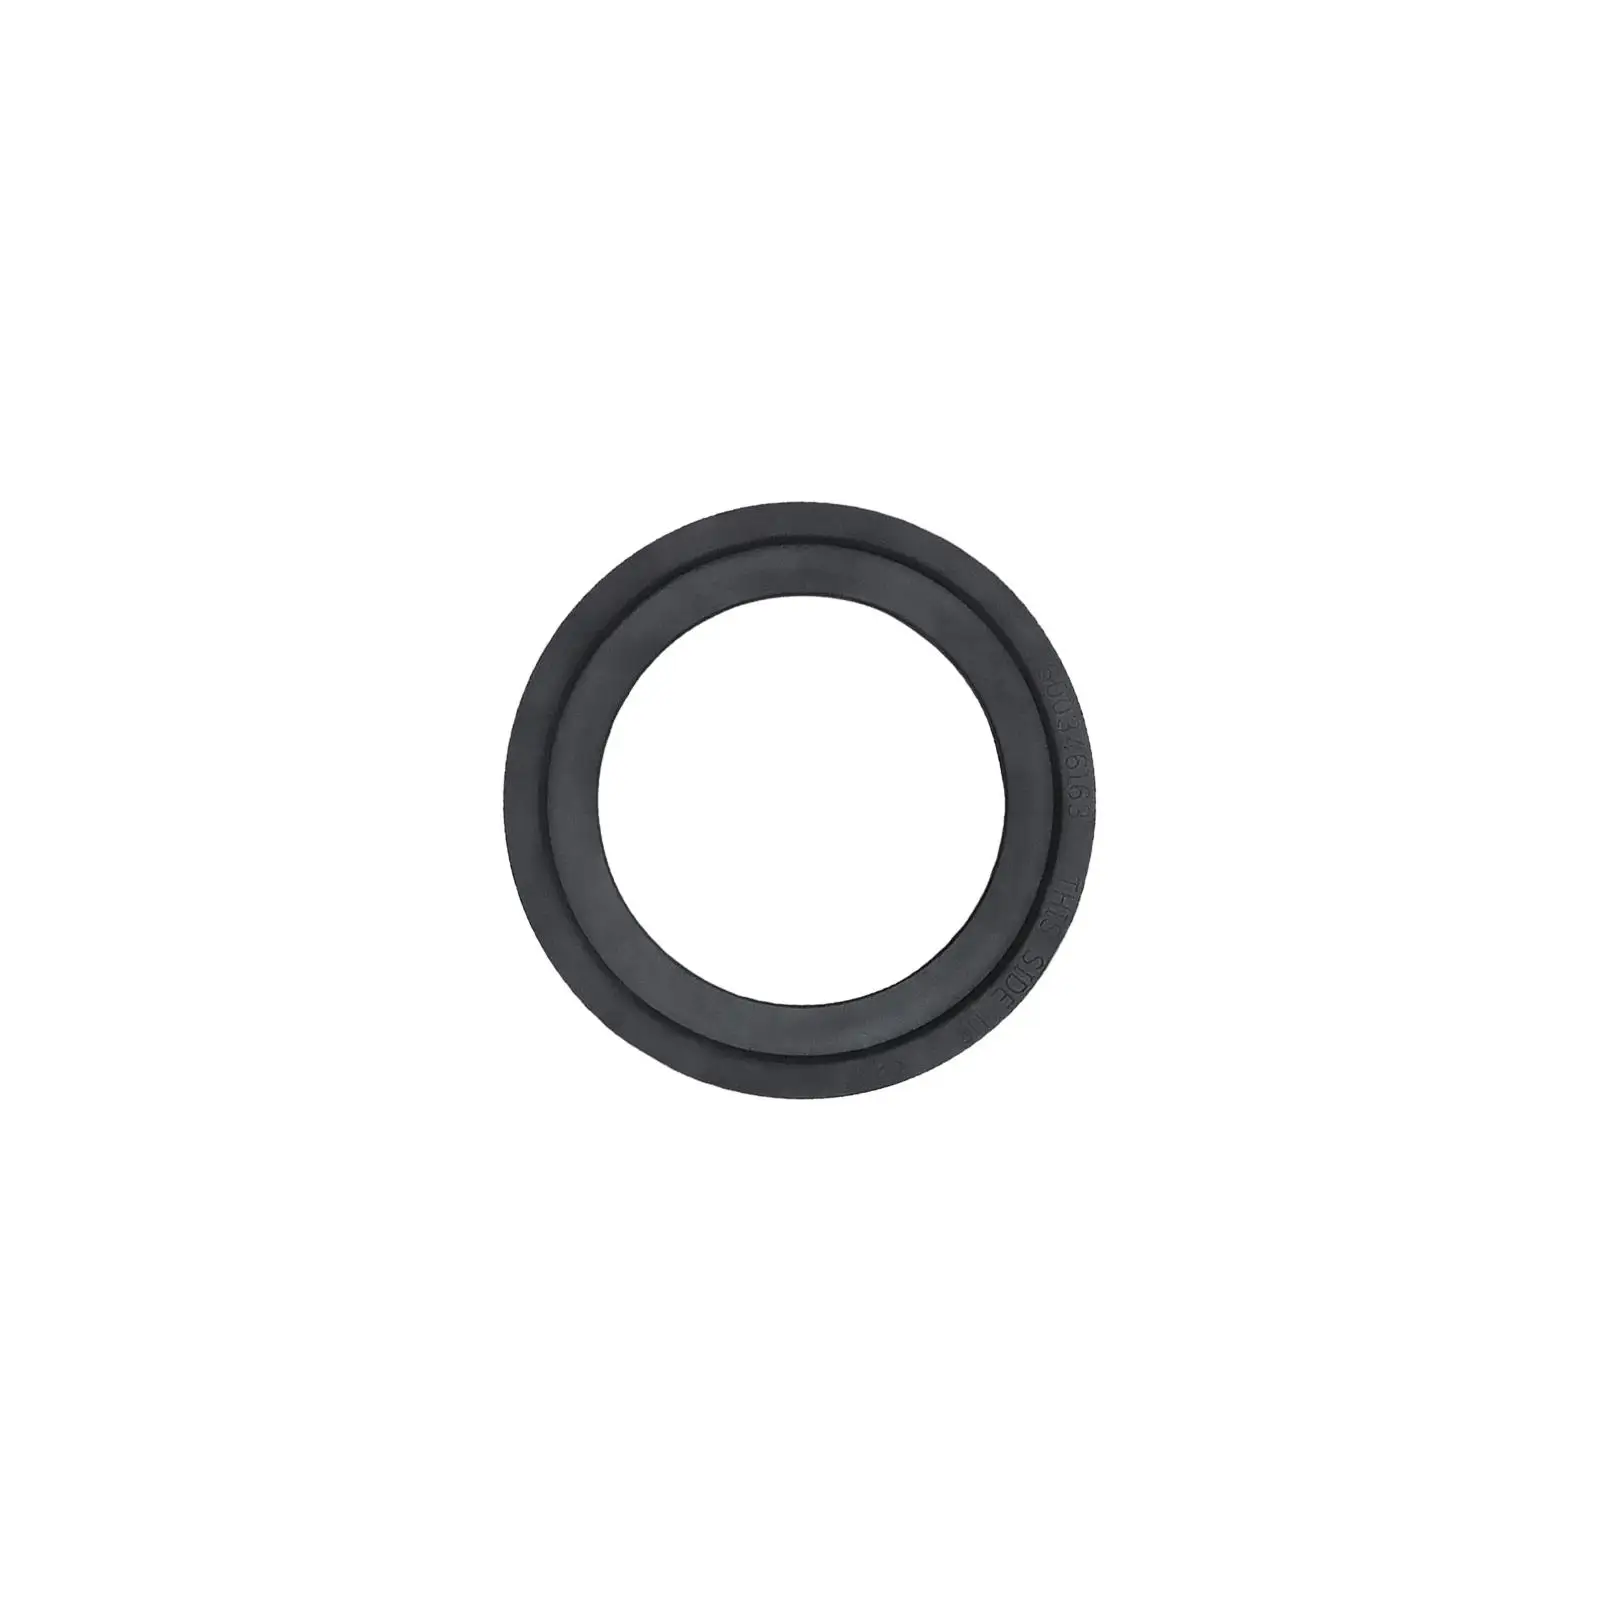 RV Toilet Flush Ball Ring Seal Gaskets RV Accessories 385311658 for Dometic 300 310 320 RV Toilet Parts Durable